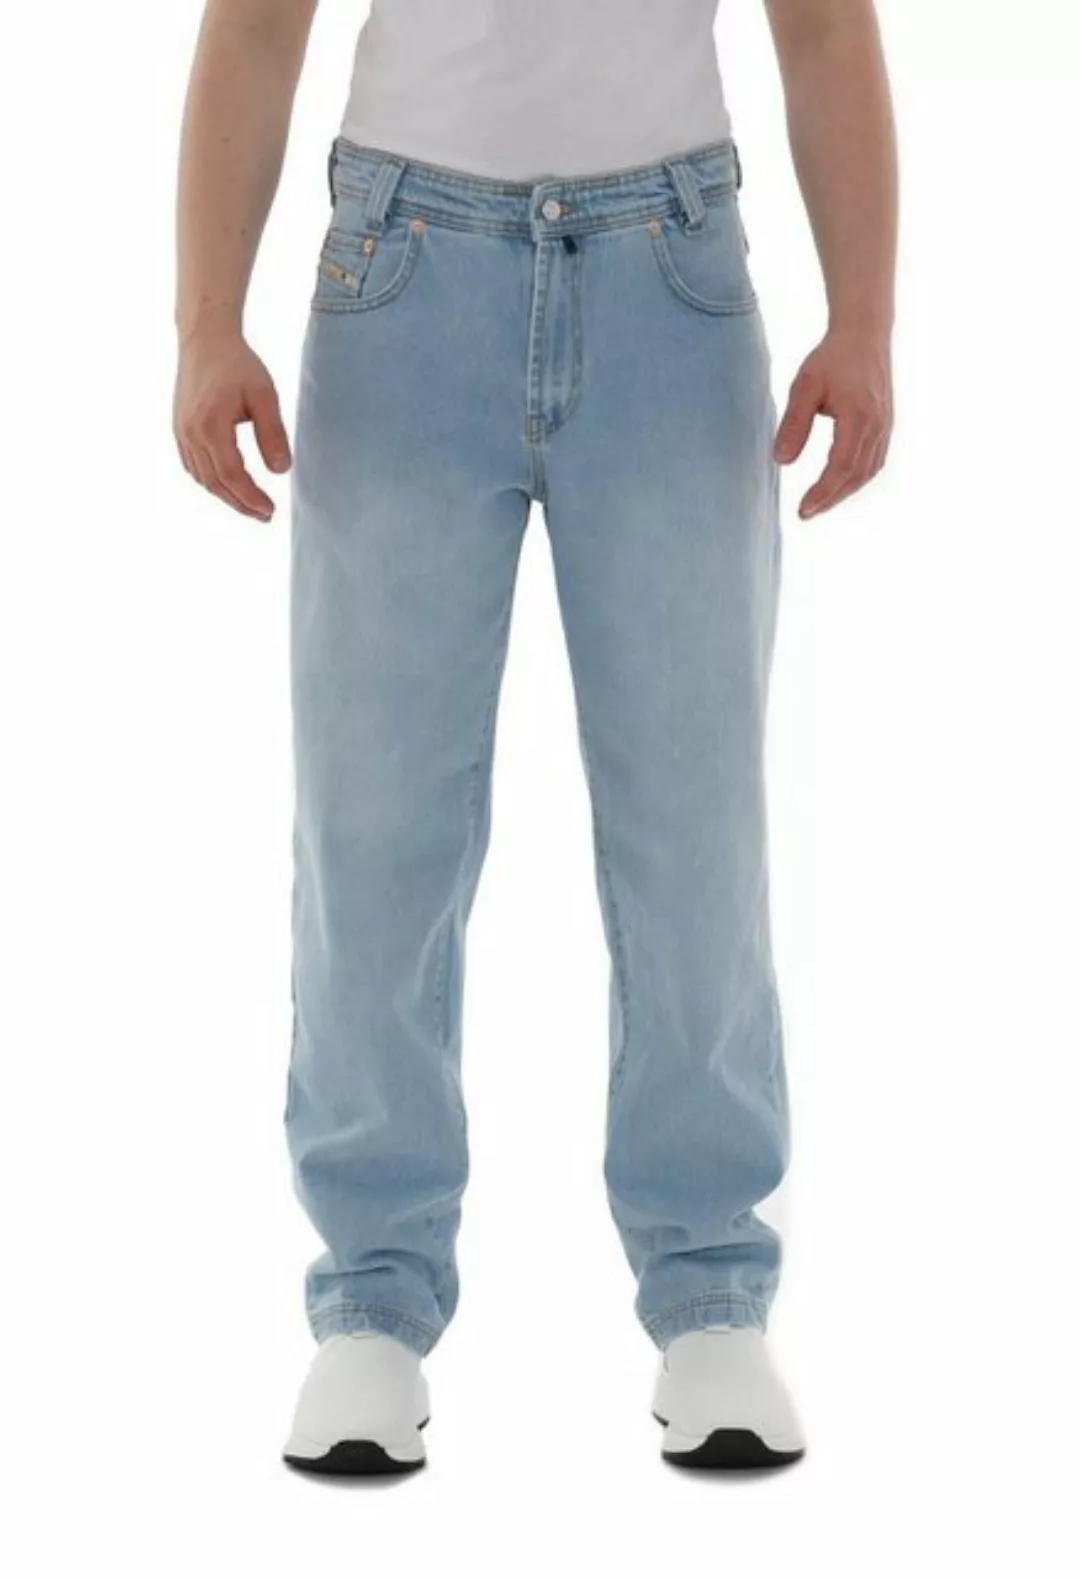 PICALDI Jeans Weite Jeans Zicco 472 Loose Fit, Relaxed Fit günstig online kaufen